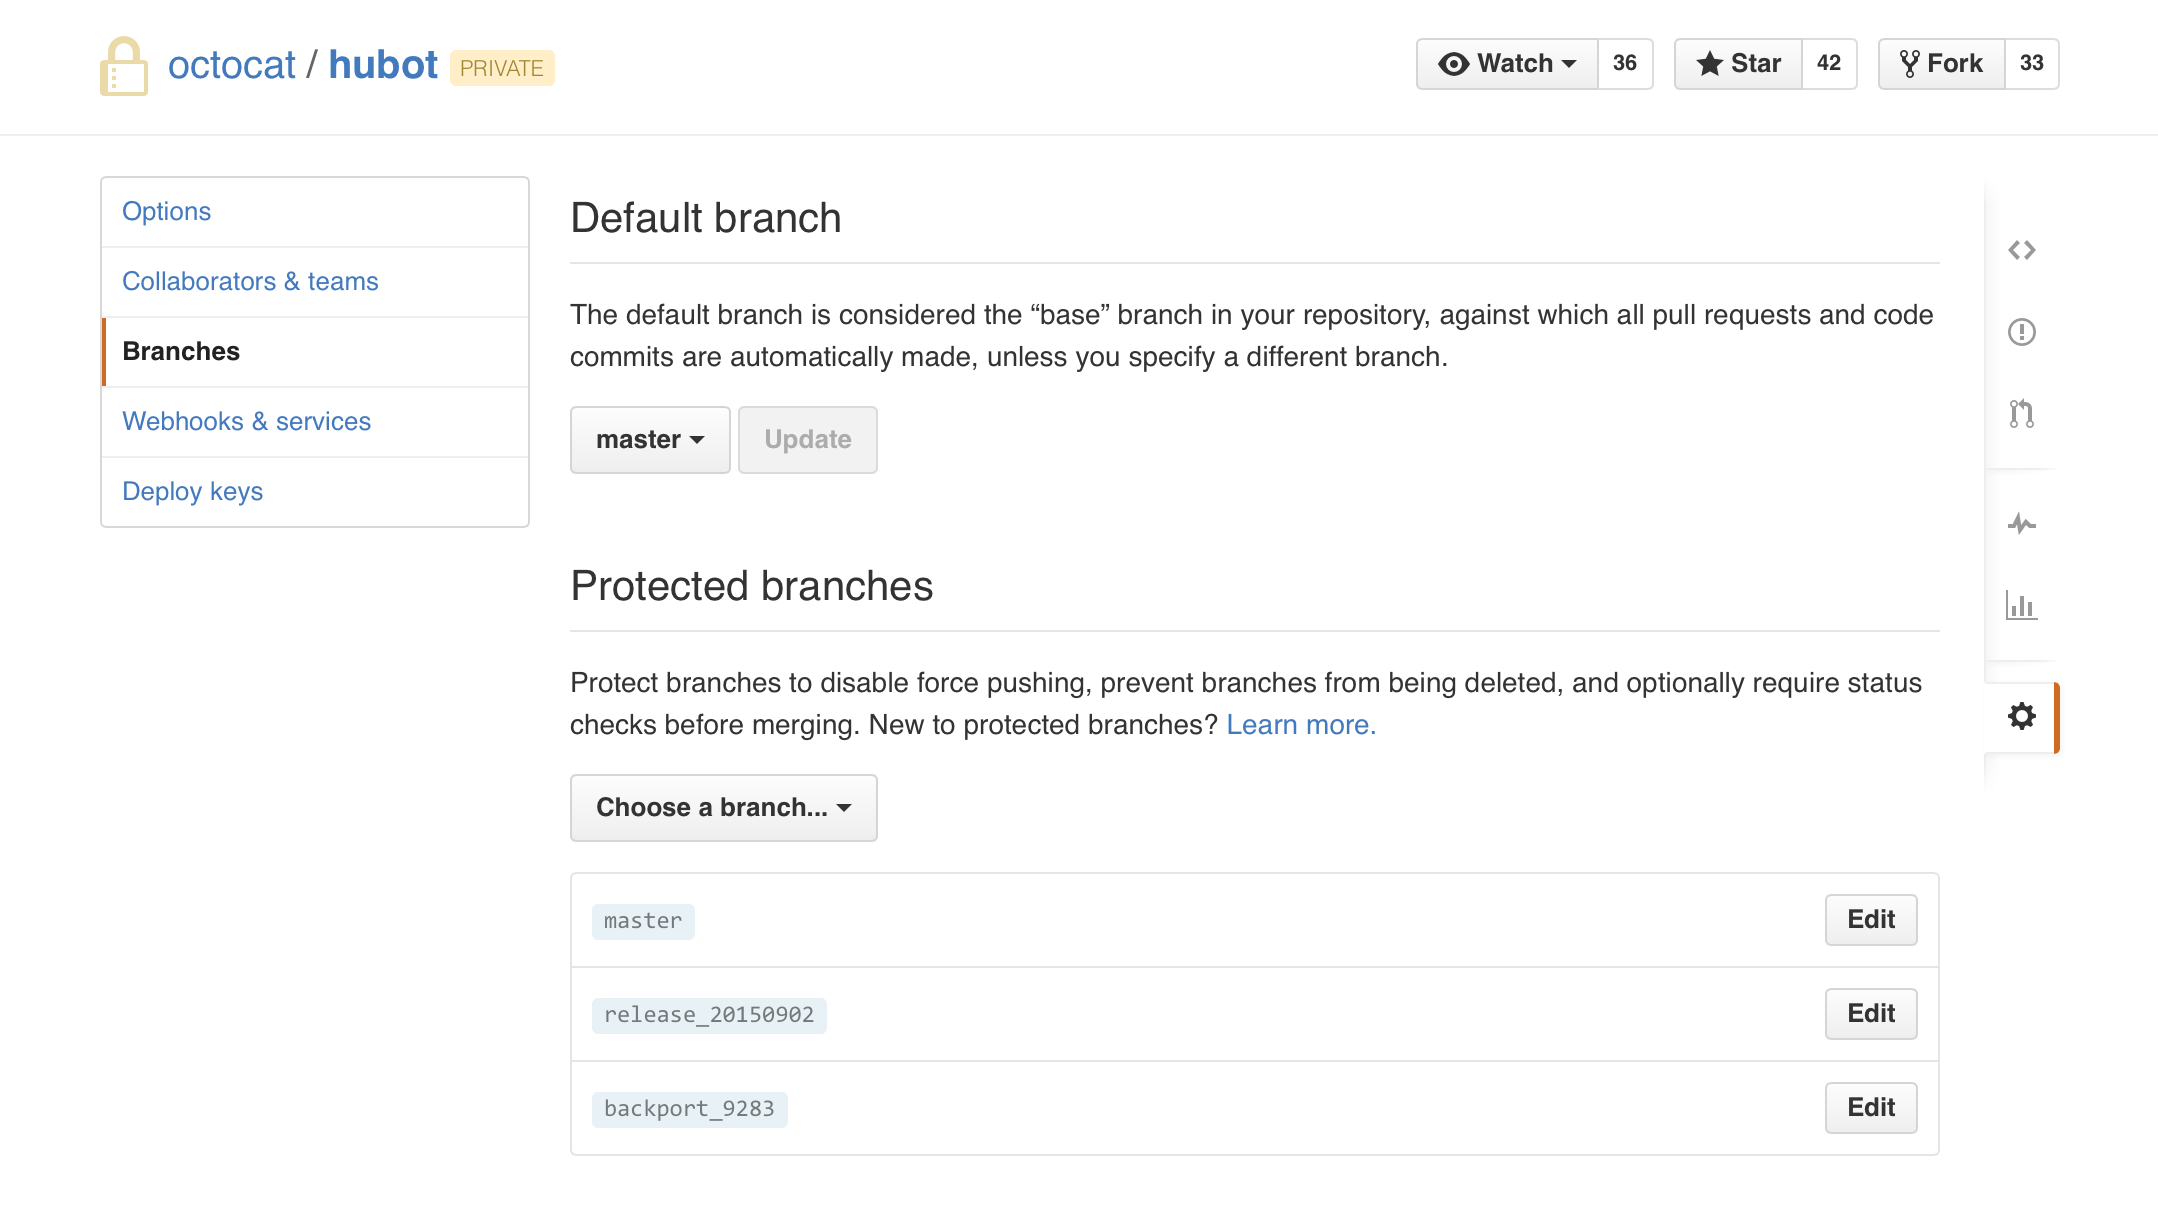 Repository Branches settings page